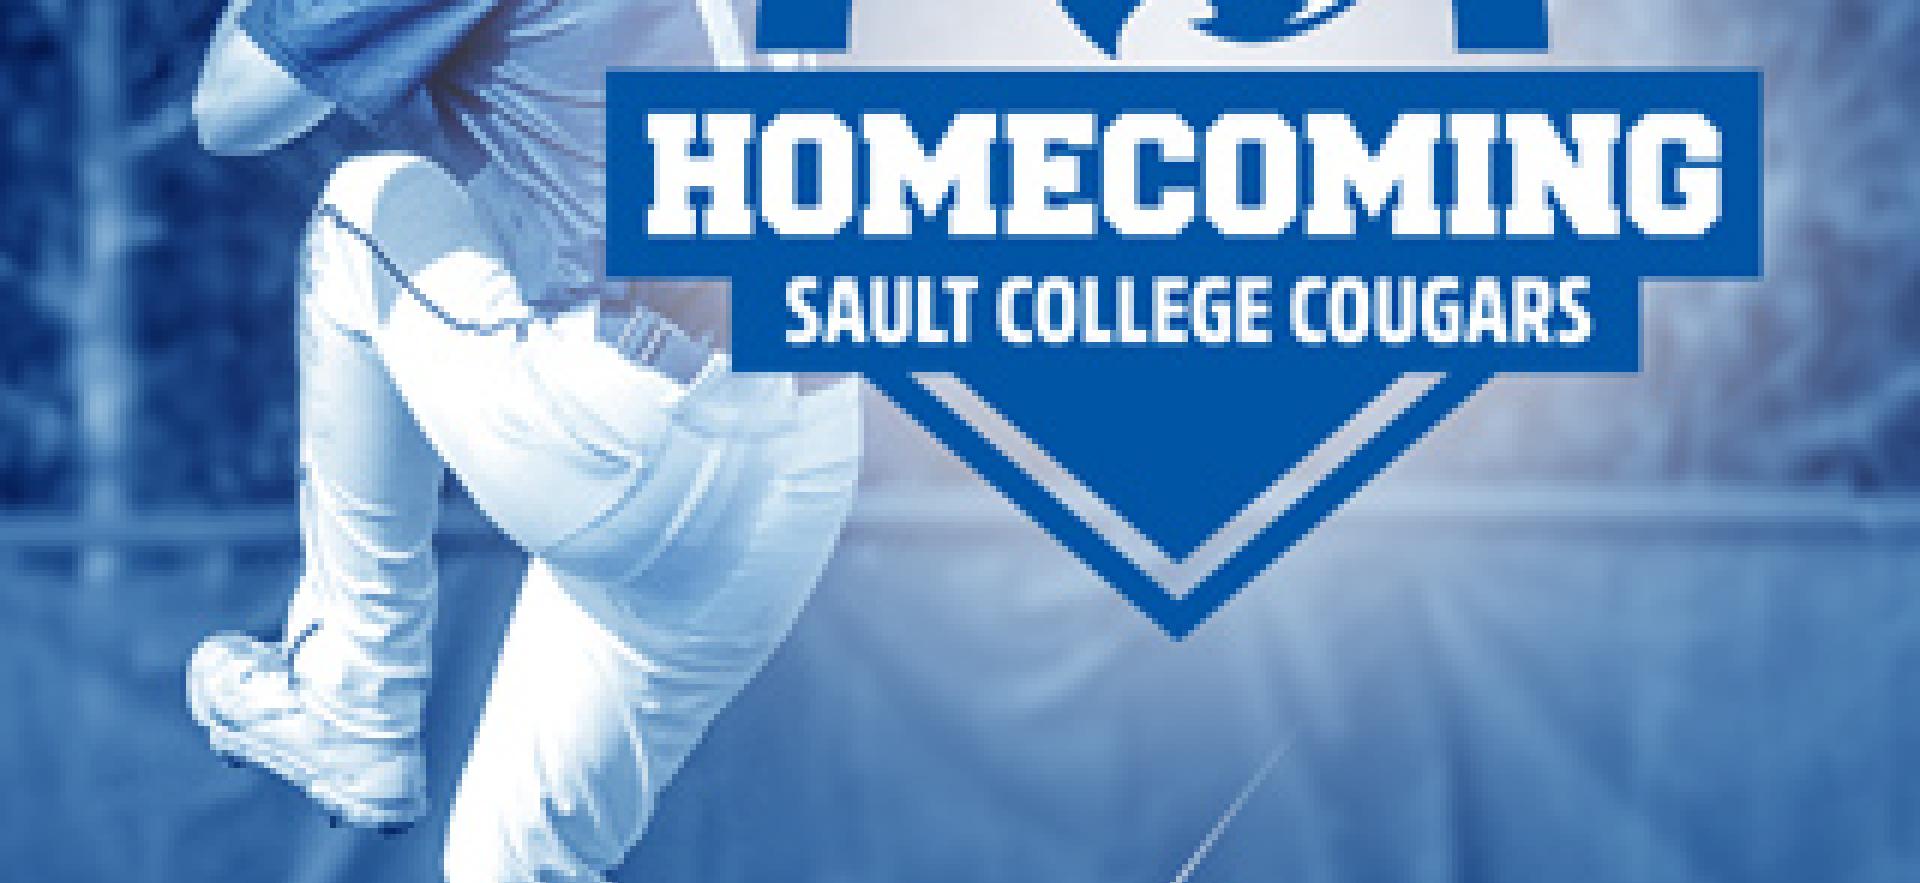 baseball player winding up to pitch baseball on field playing for Sault College